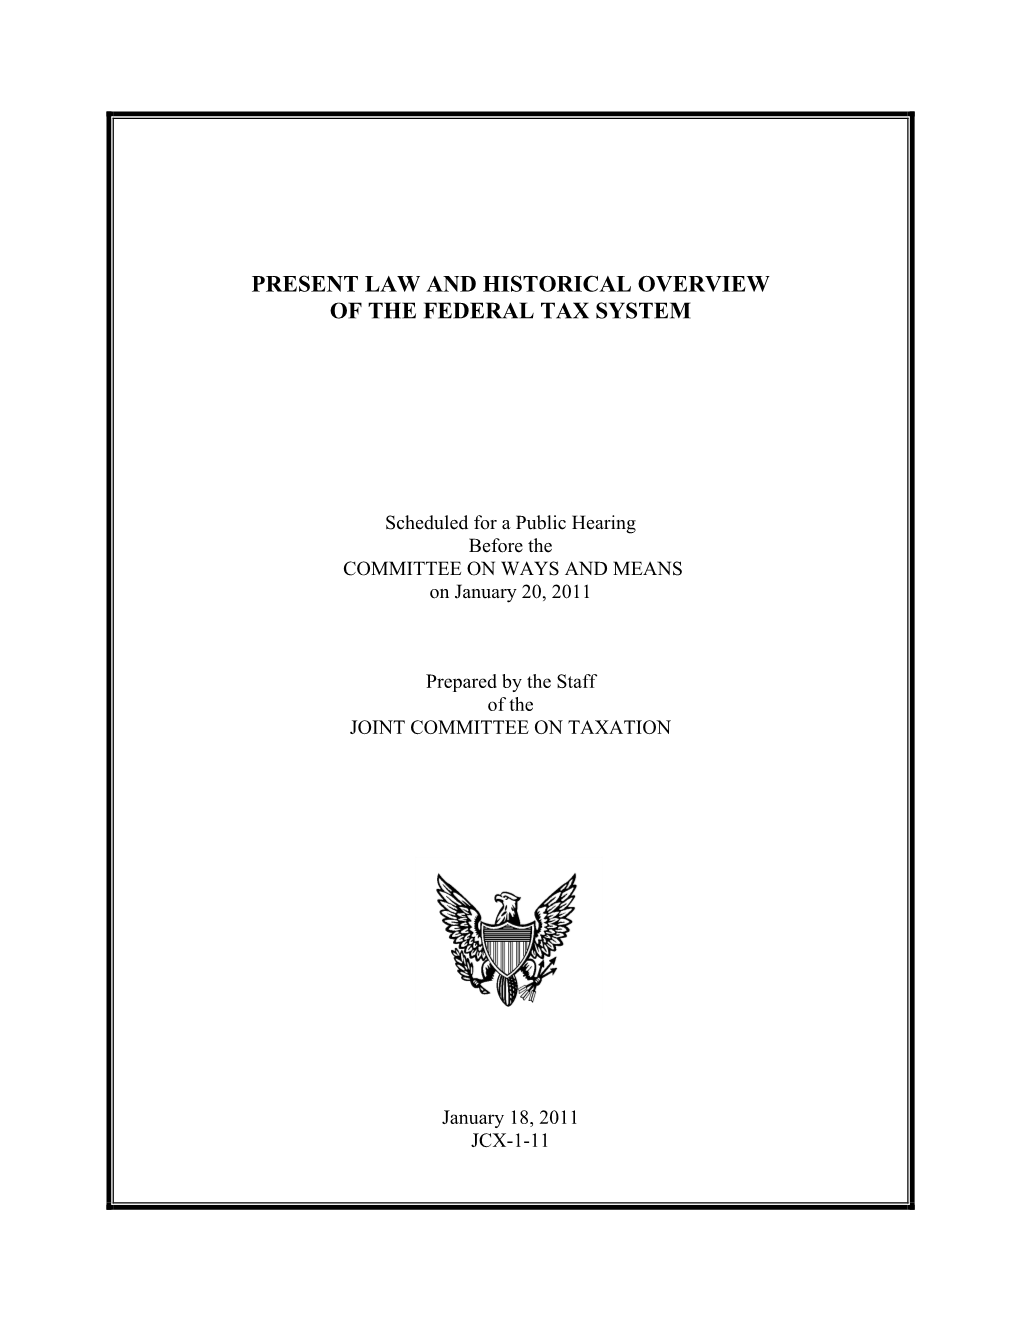 Present Law and Historical Overview of the Federal Tax System